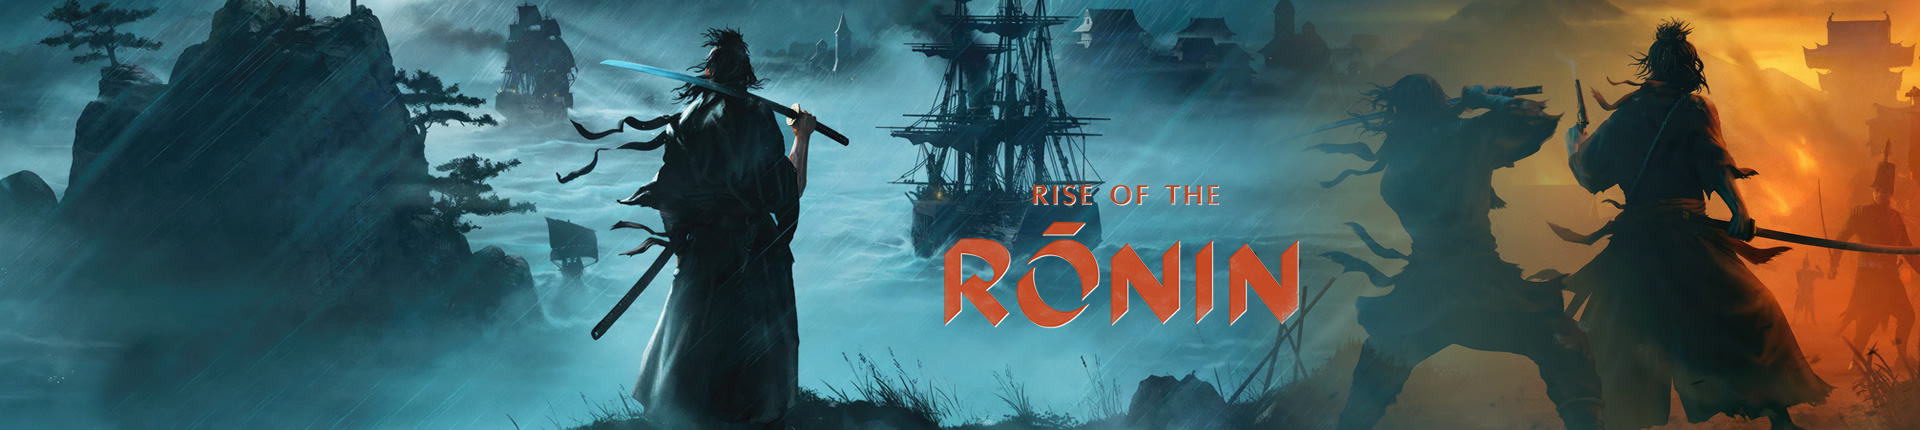 RISE OF THE RONIN - BANNER